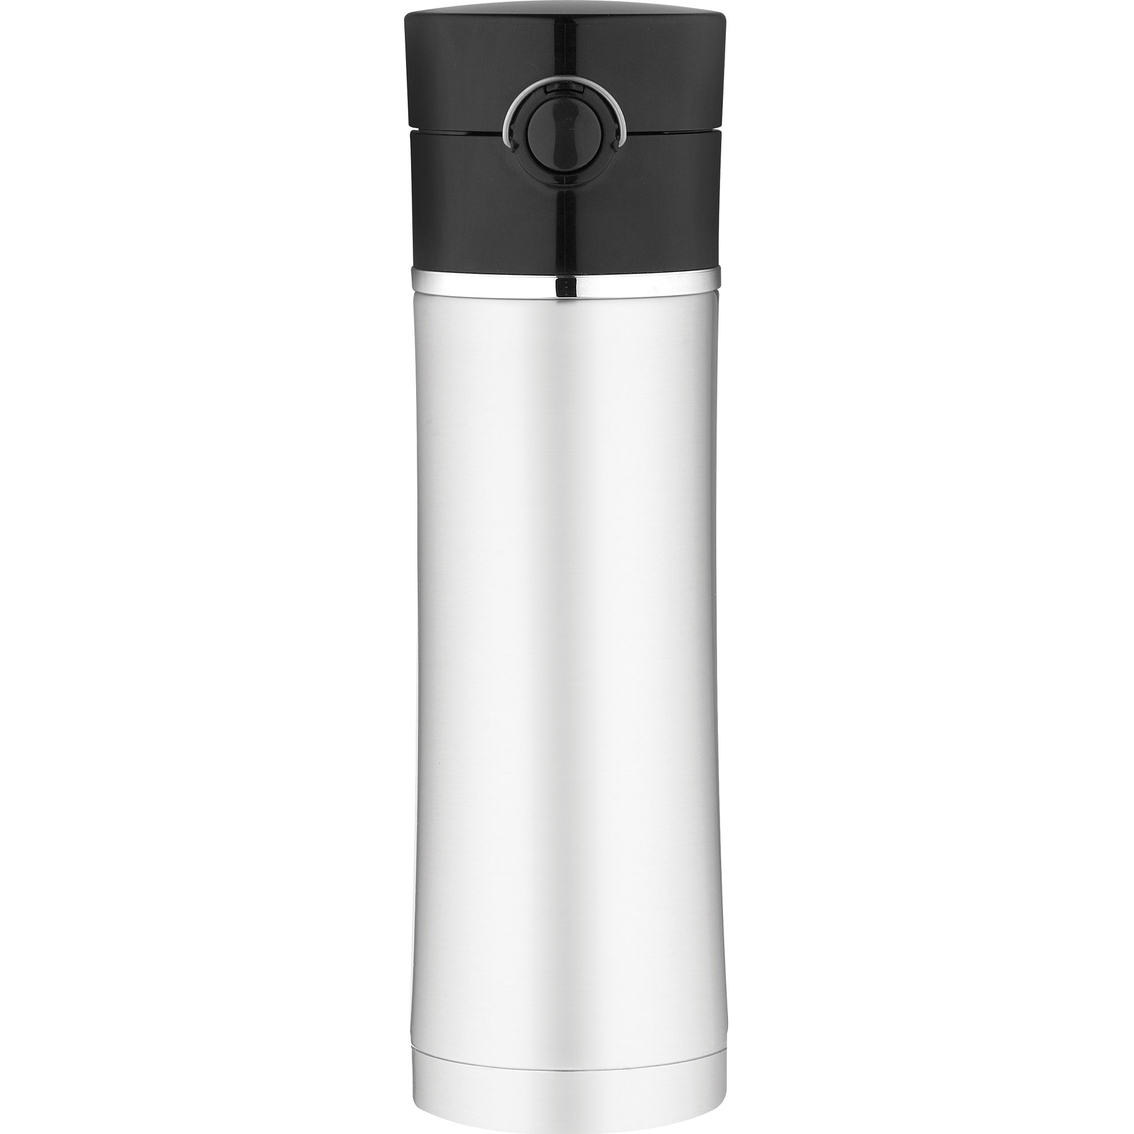 thermos brand products